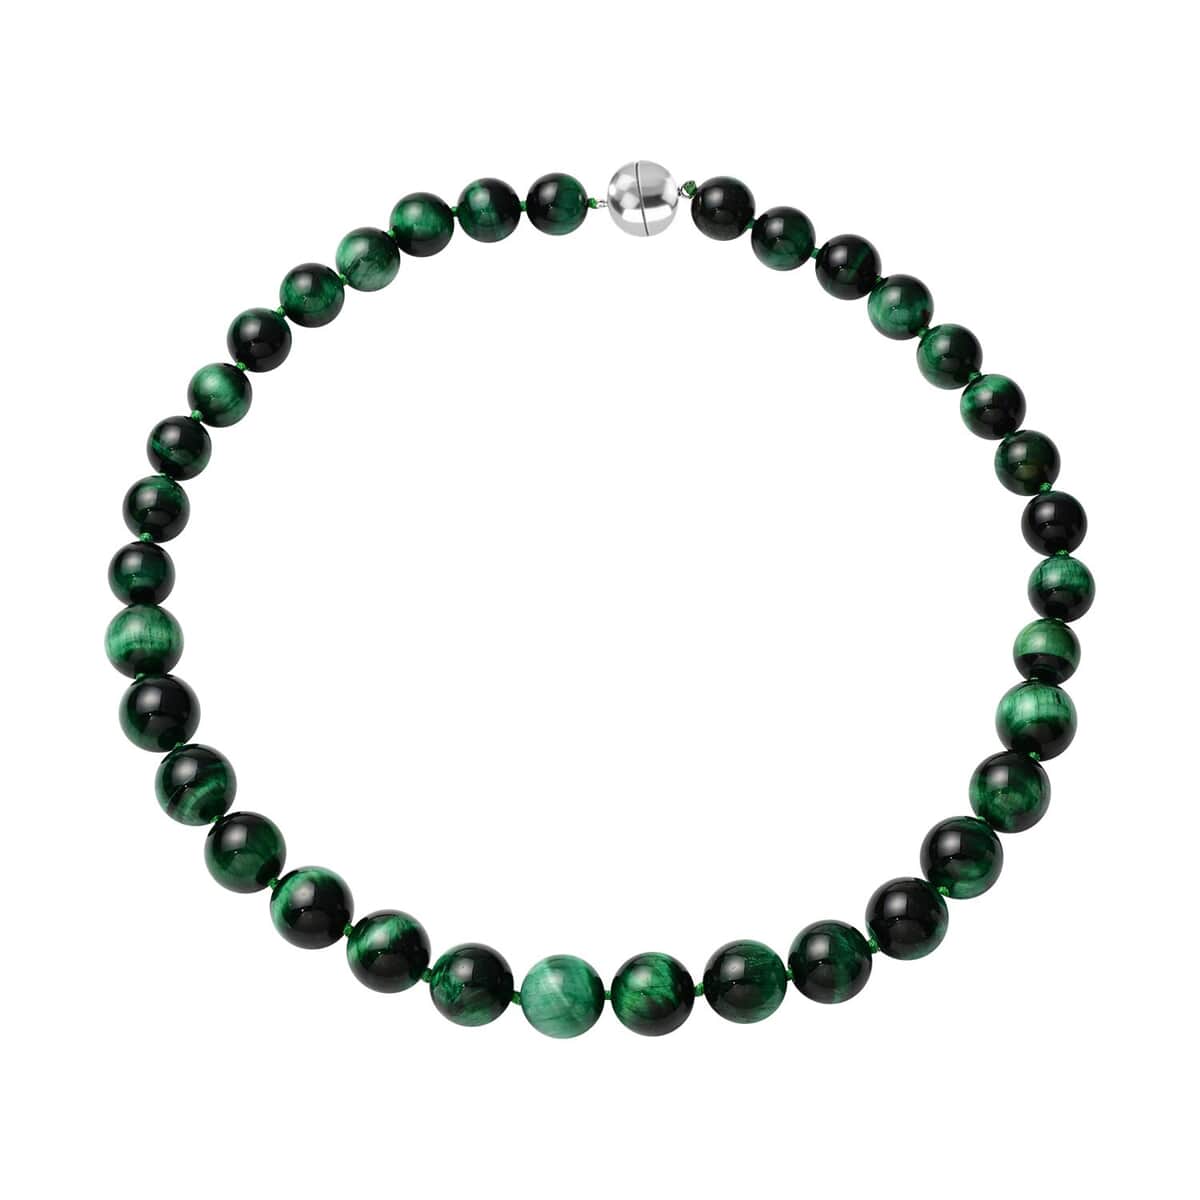 Premium Green Tiger's Eye Necklace in Rhodium Over Sterling Silver, Beaded Necklace, Bead Jewelry, Birthday Gifts 607.50 ctw (20 Inches) image number 0